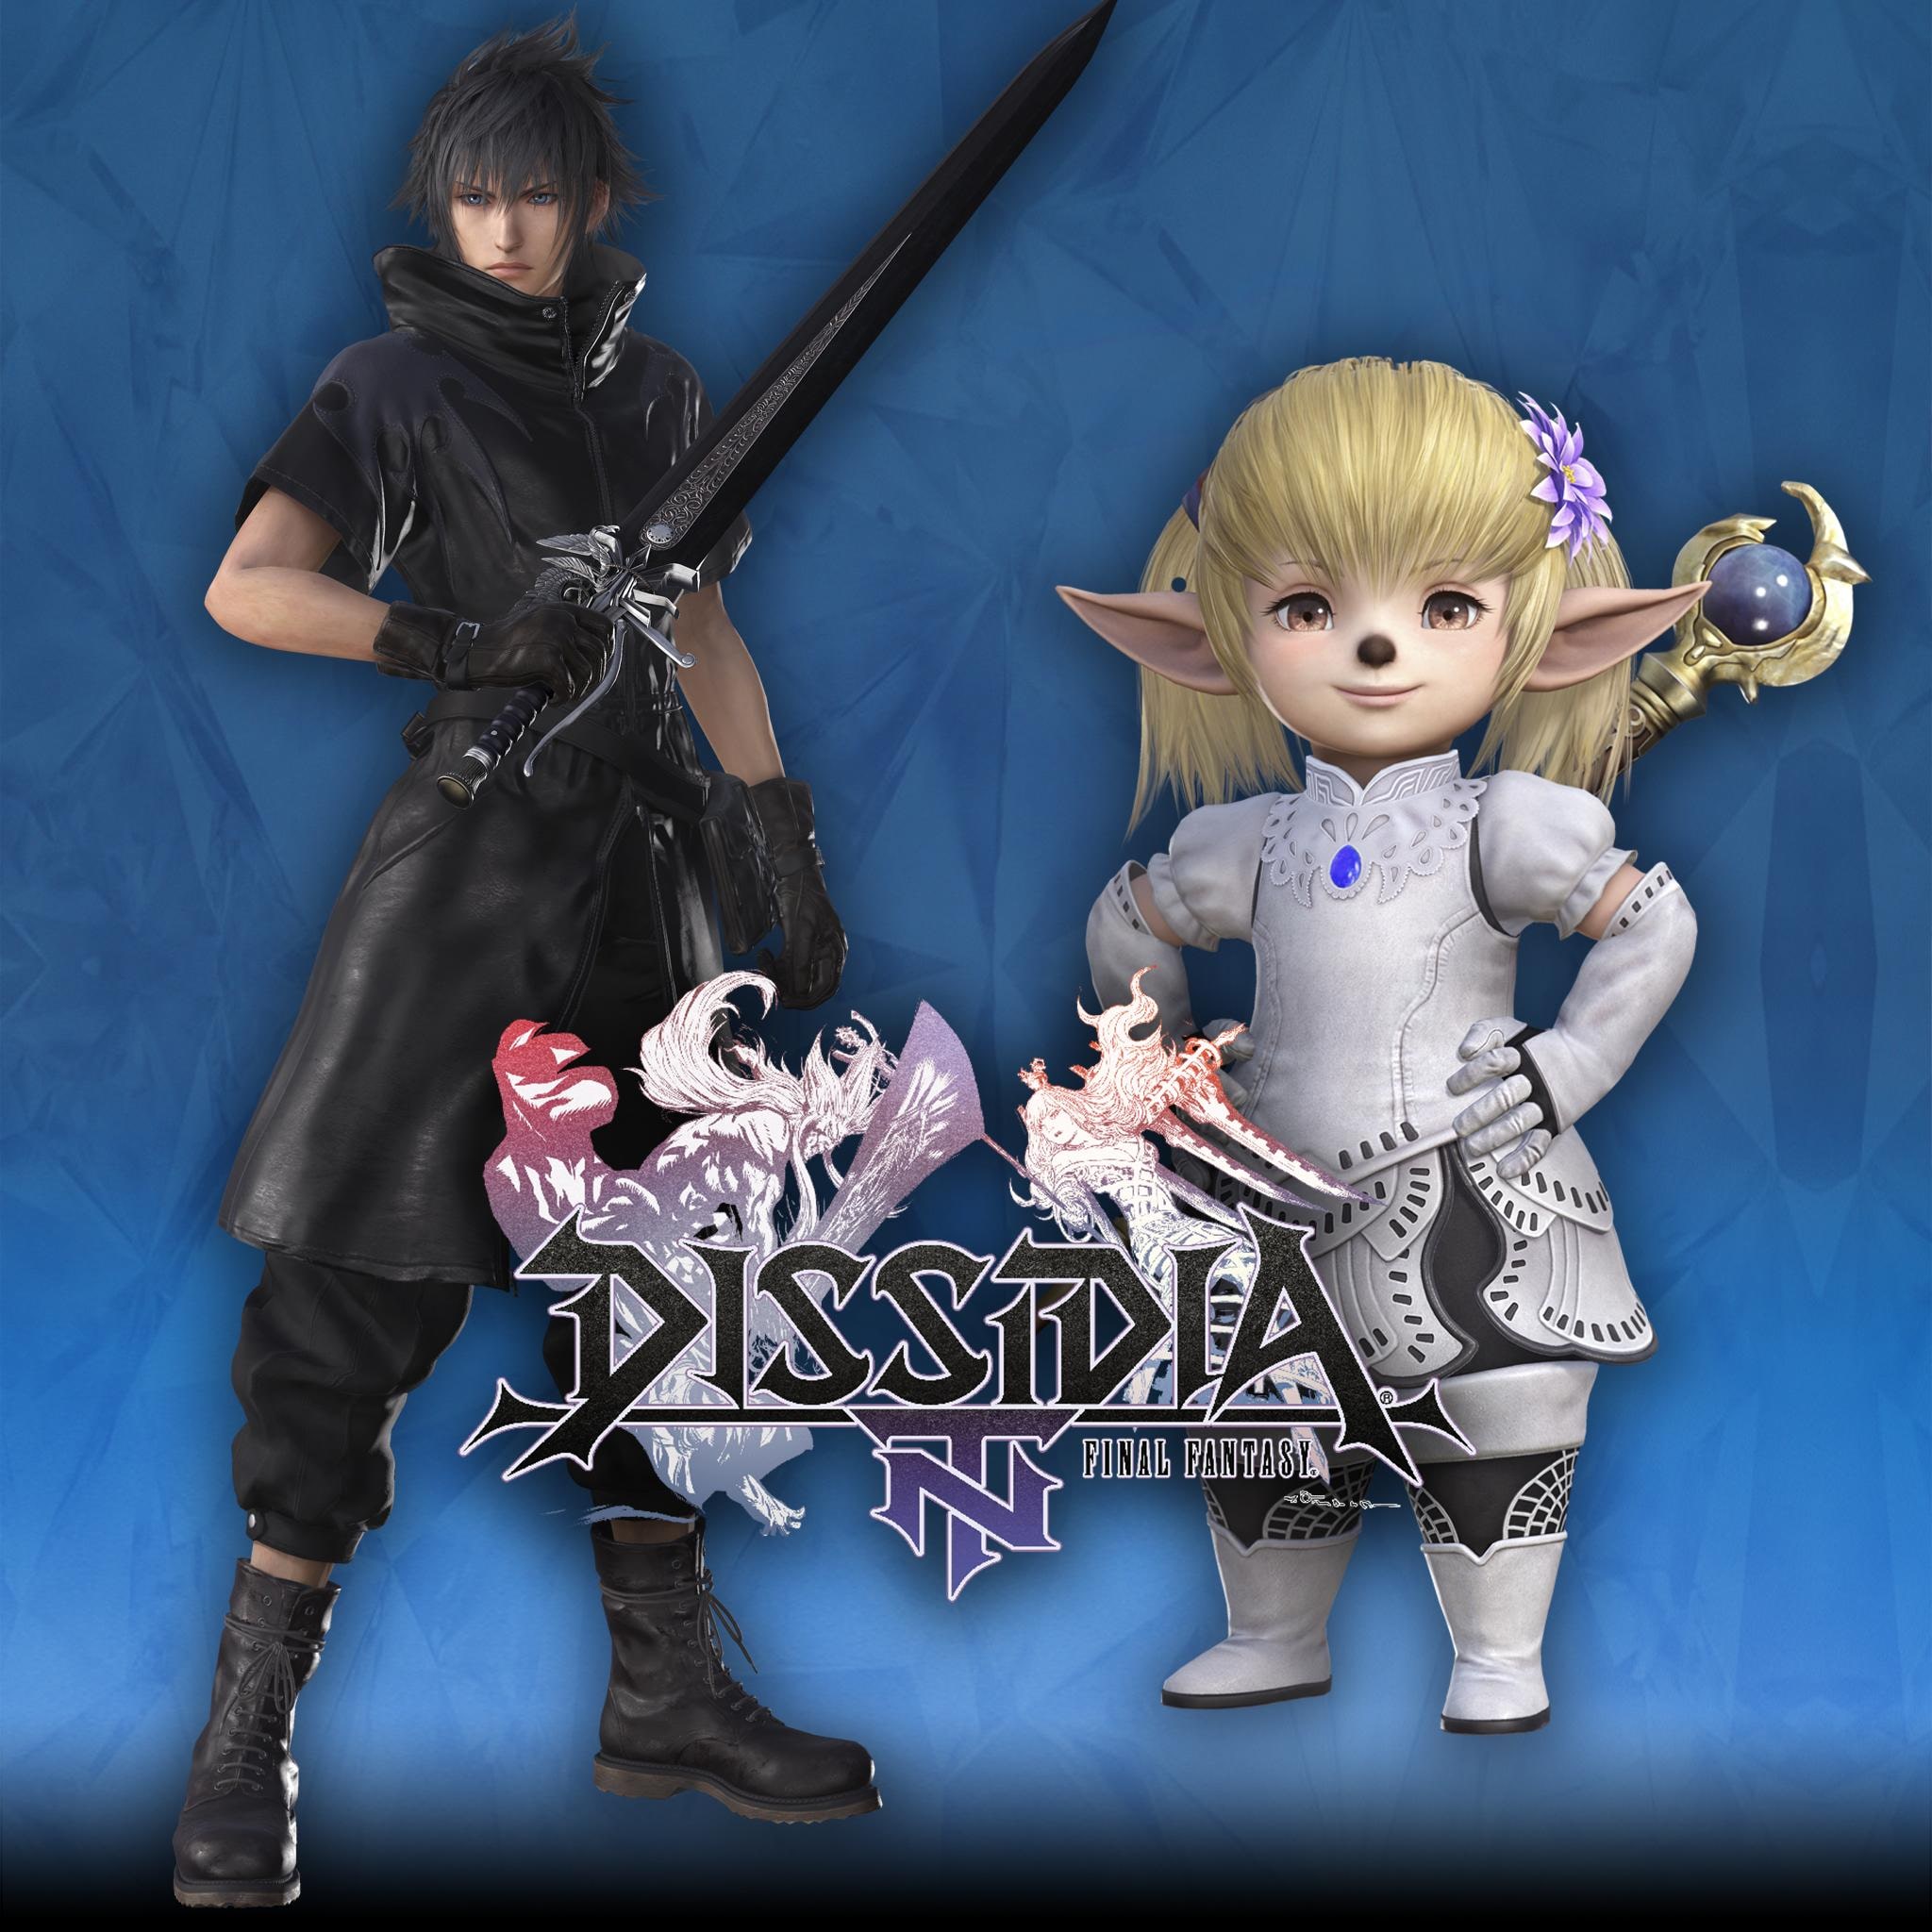 3rd Appearance Special Set for Shantotto and Noctis